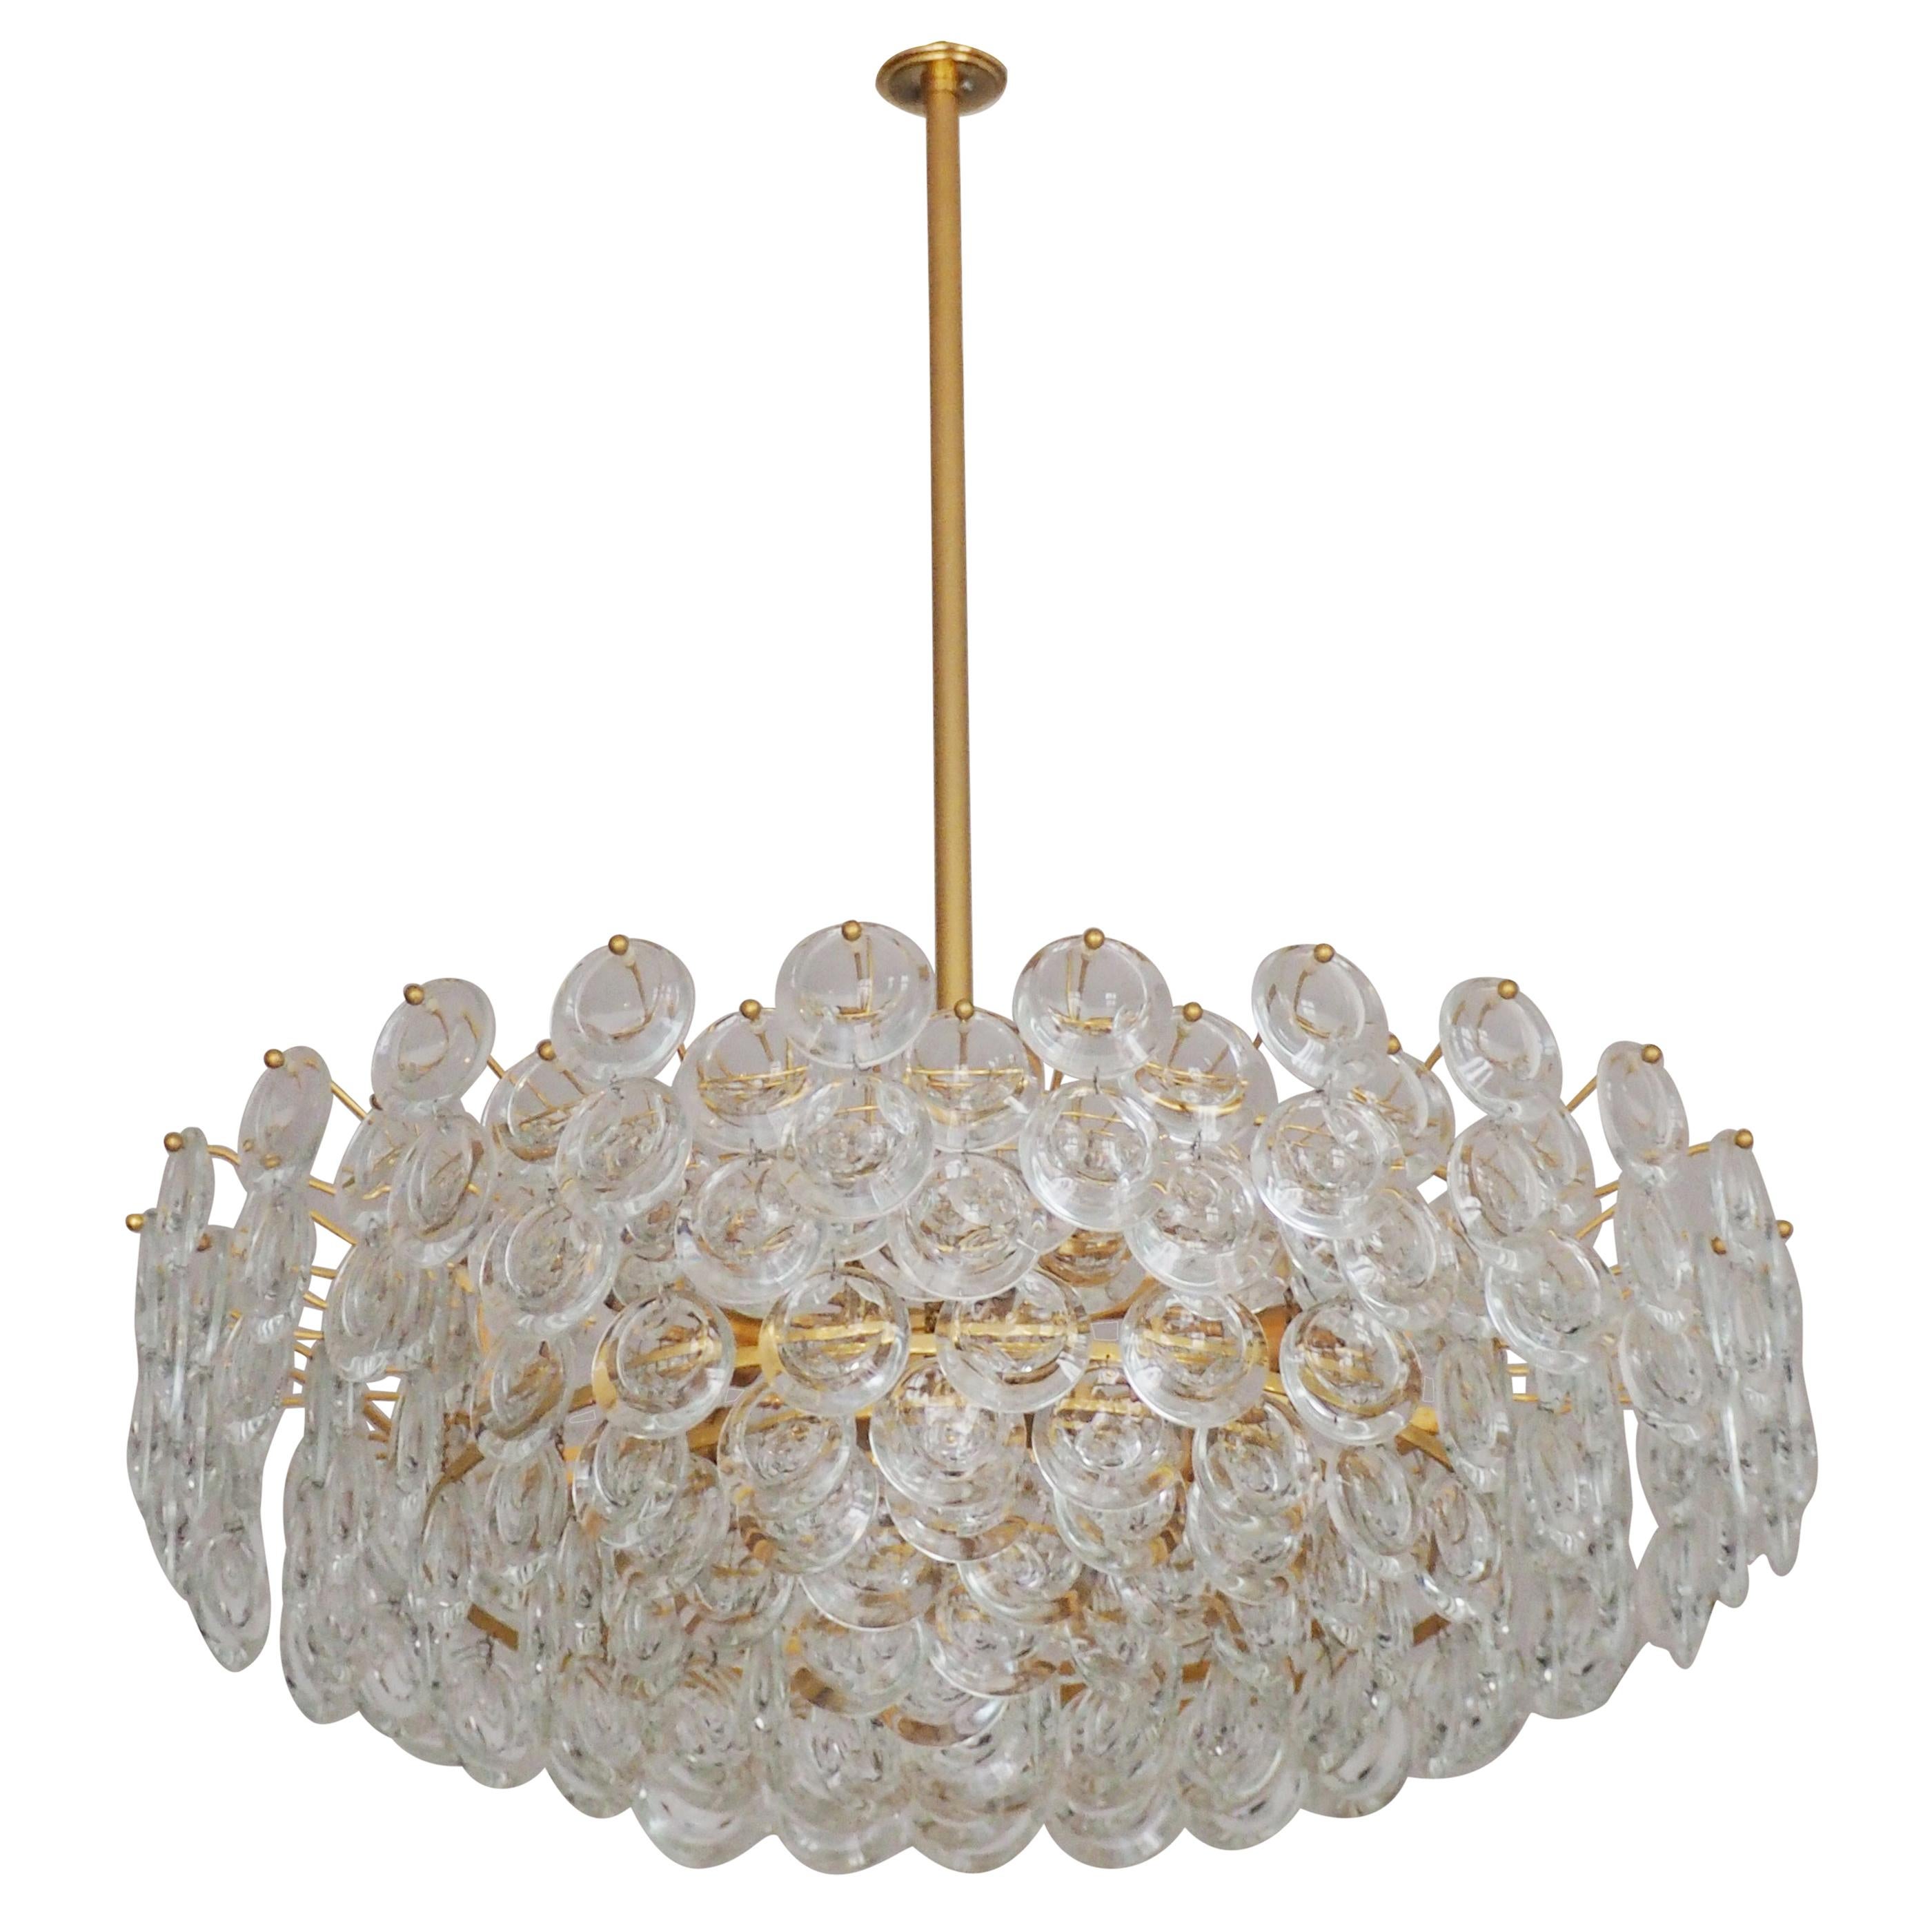 Very Large Gold-Plated and Cut Glass Chandelier by Palwa, circa 1960s